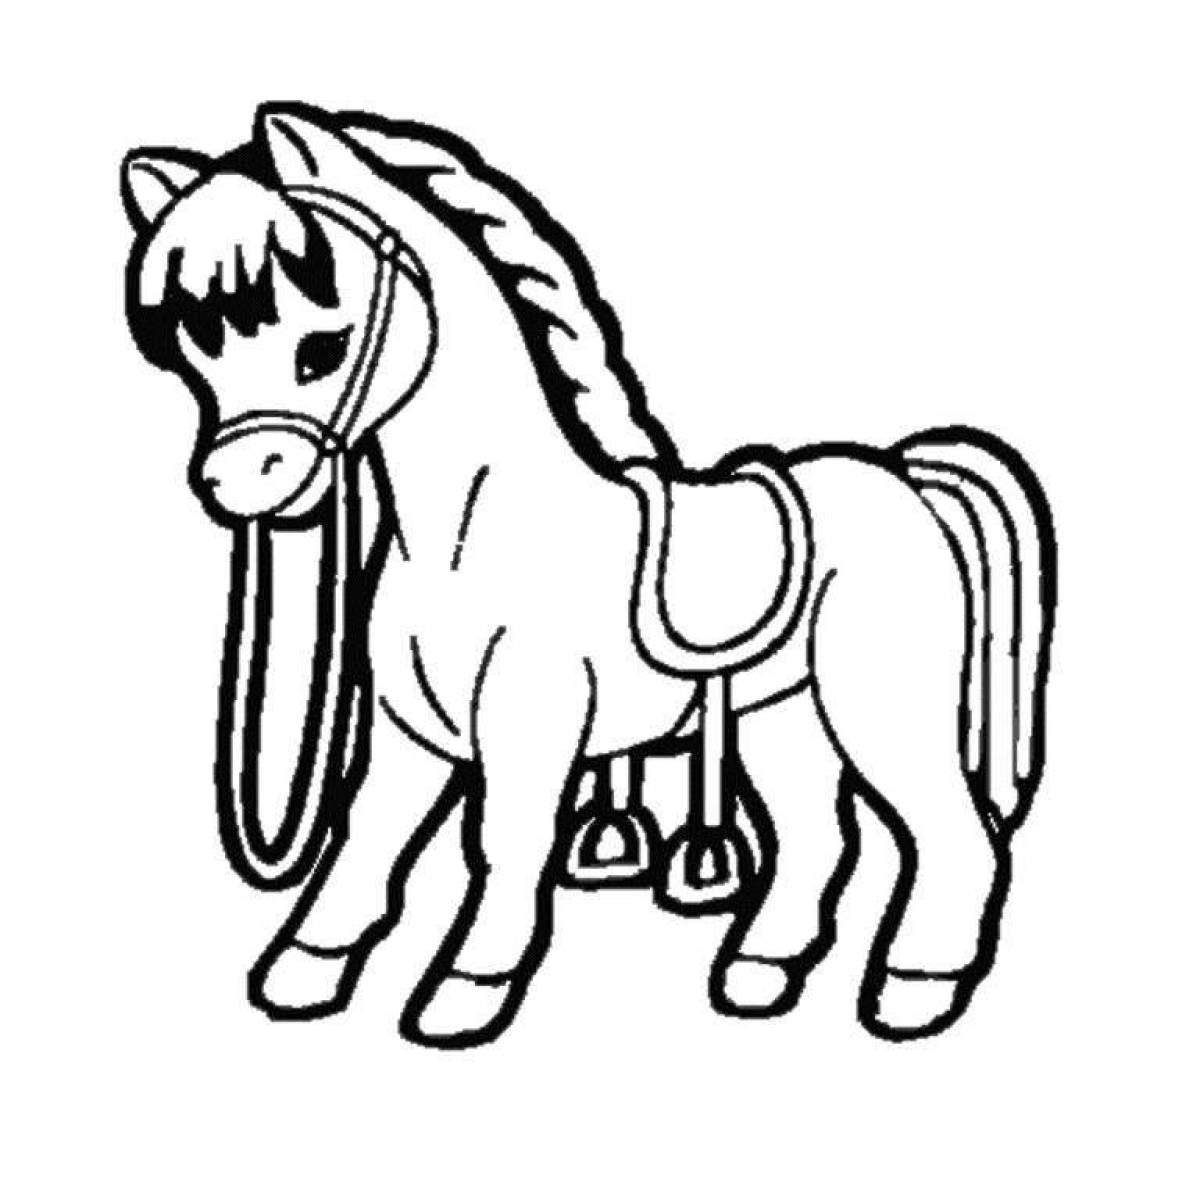 Amazing horse coloring page for 3-4 year olds